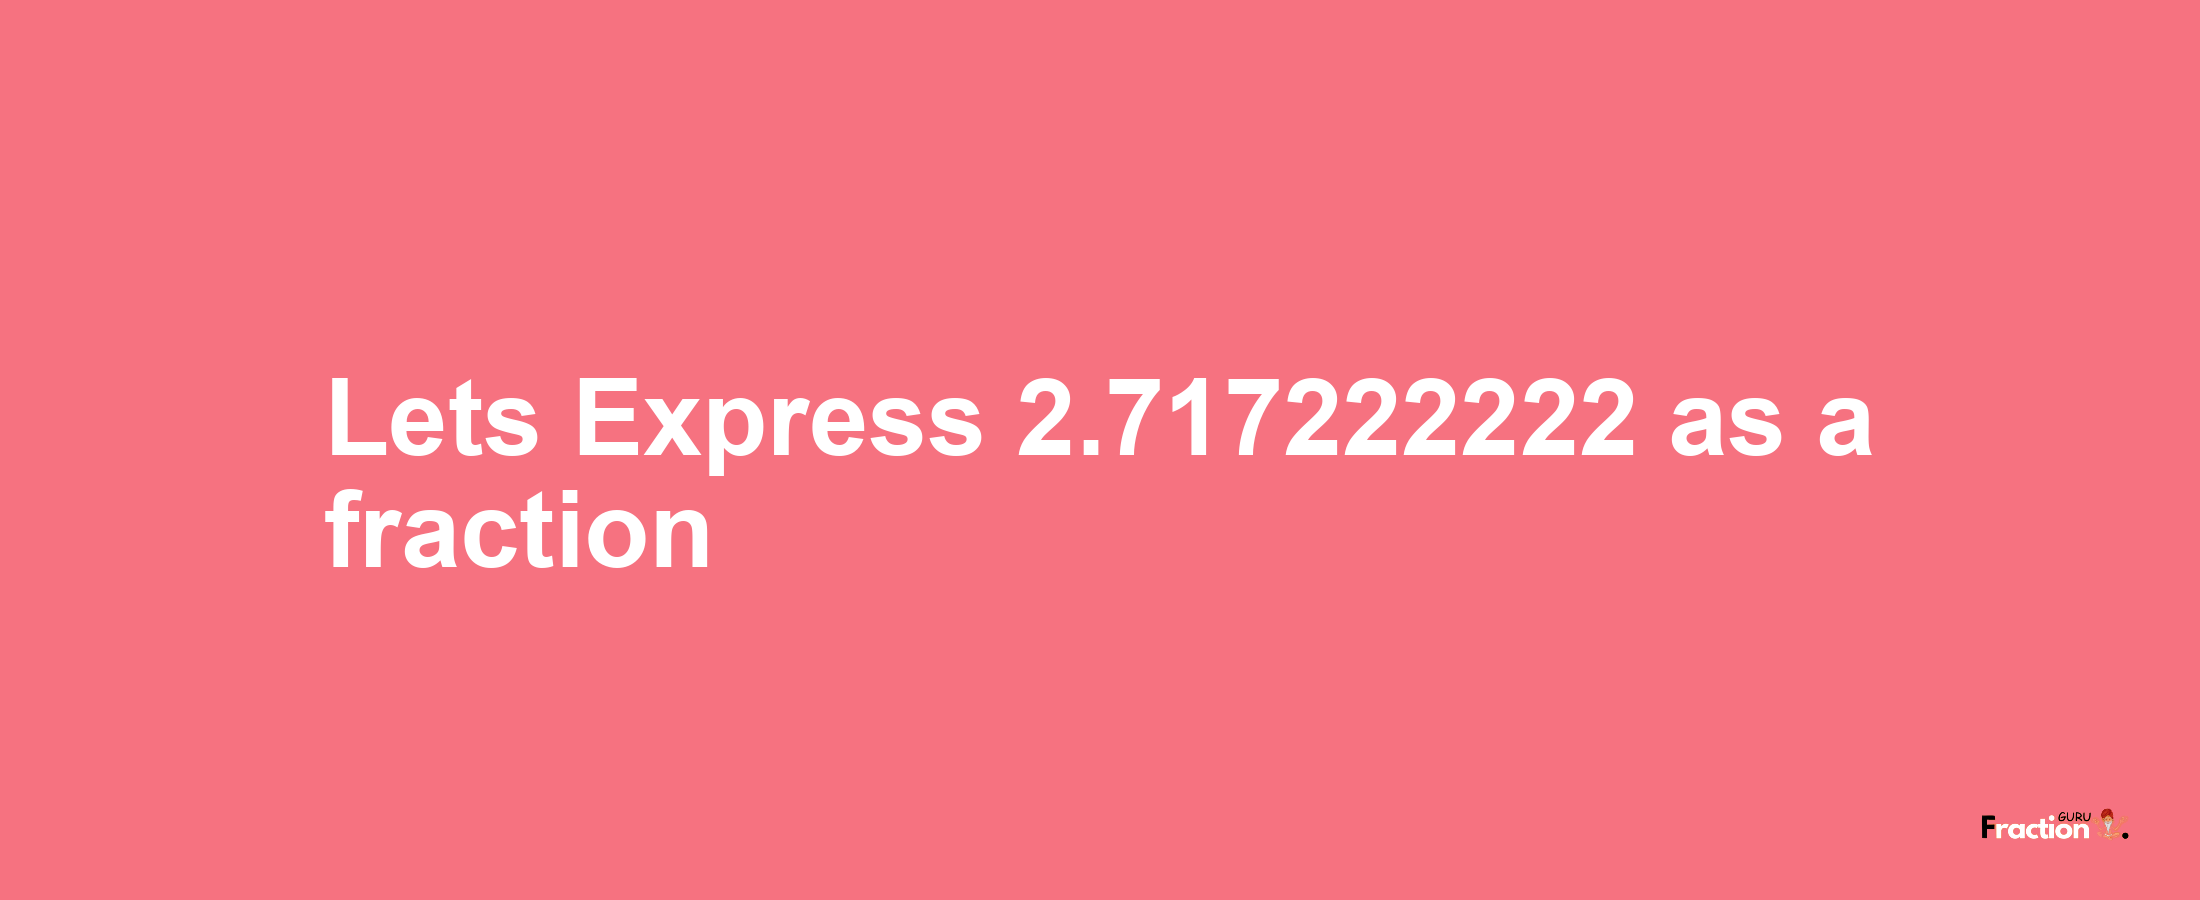 Lets Express 2.717222222 as afraction